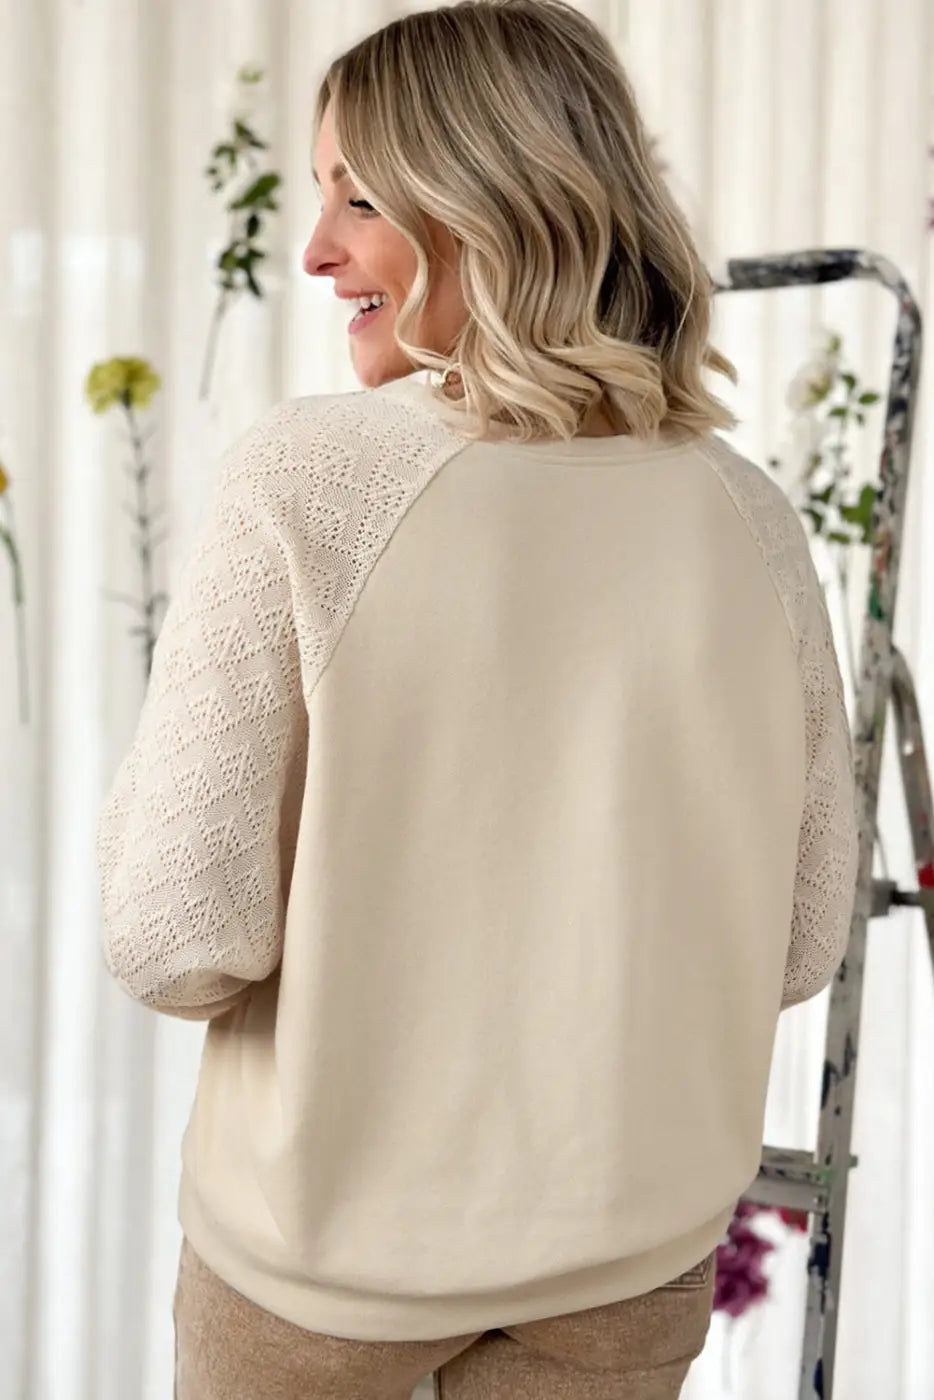 Blonde woman smiling in a vintage patchwork eyelet jumper, cream-colored knit sweater